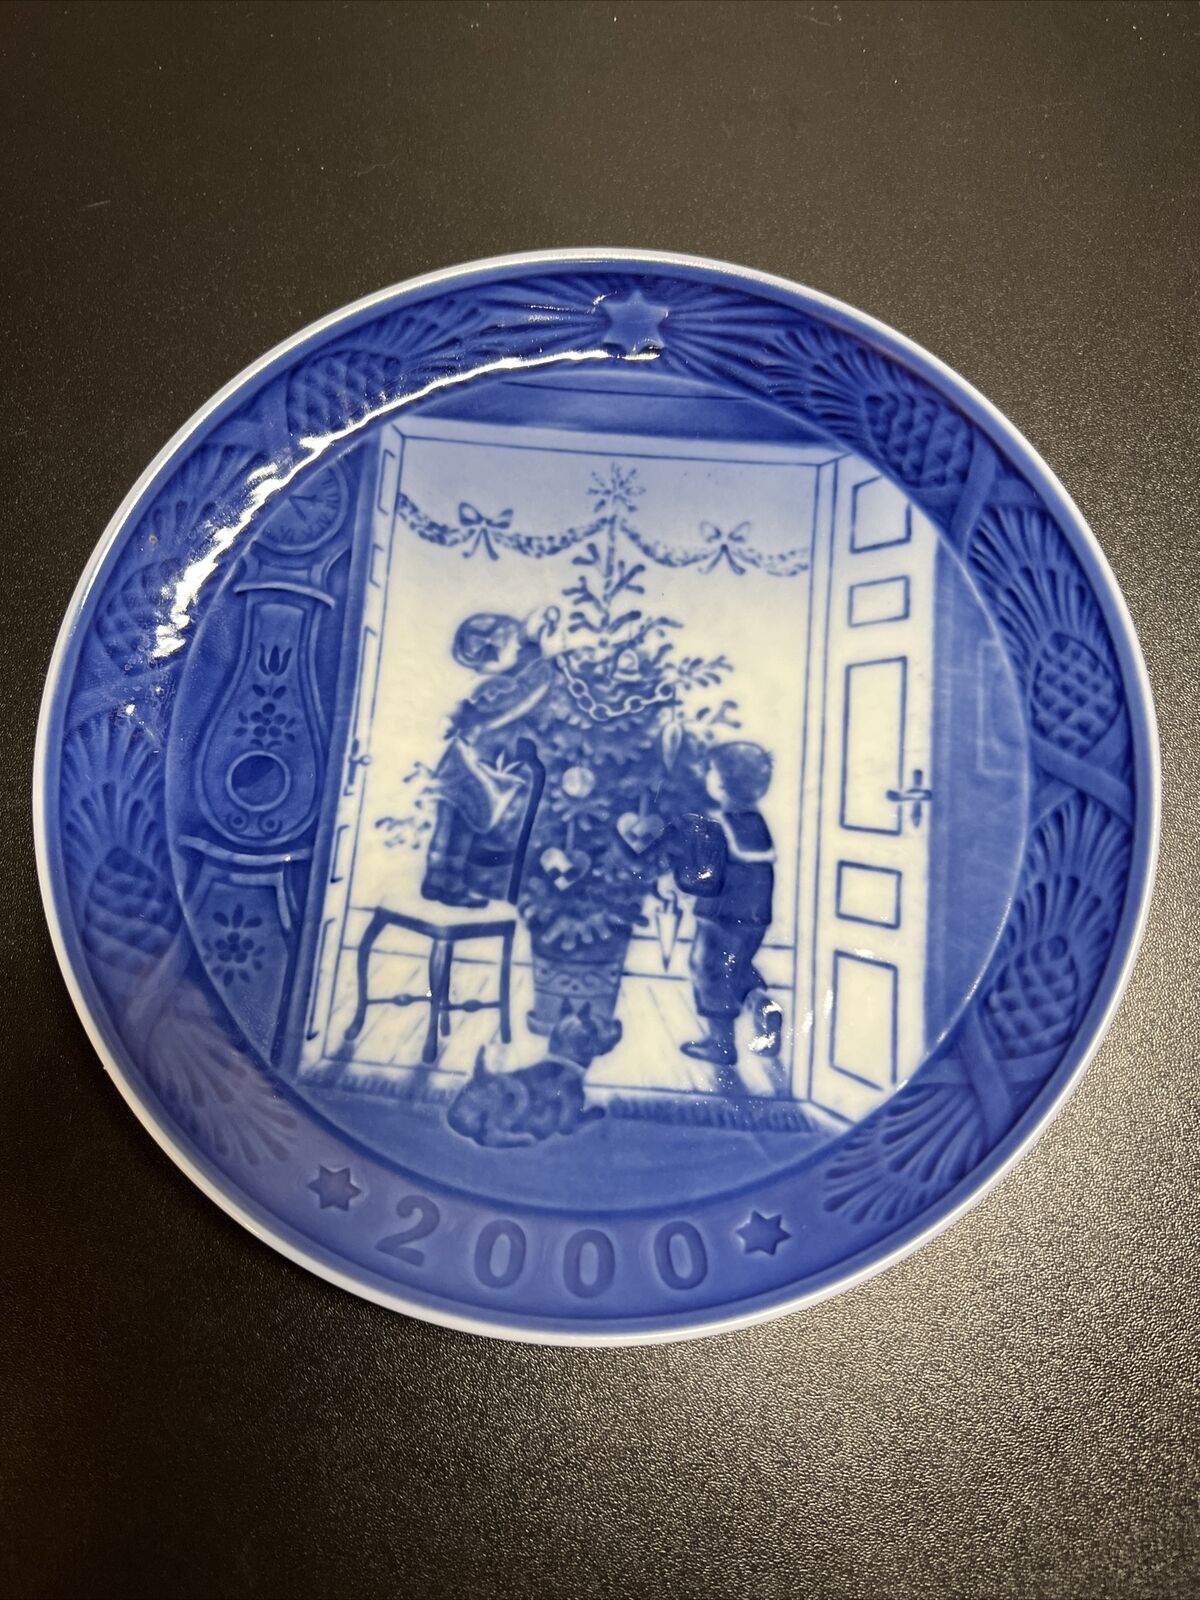 2000 Royal Copenhagen Christmas Plate  “TRIMMING THE TREE” Box And Certificates